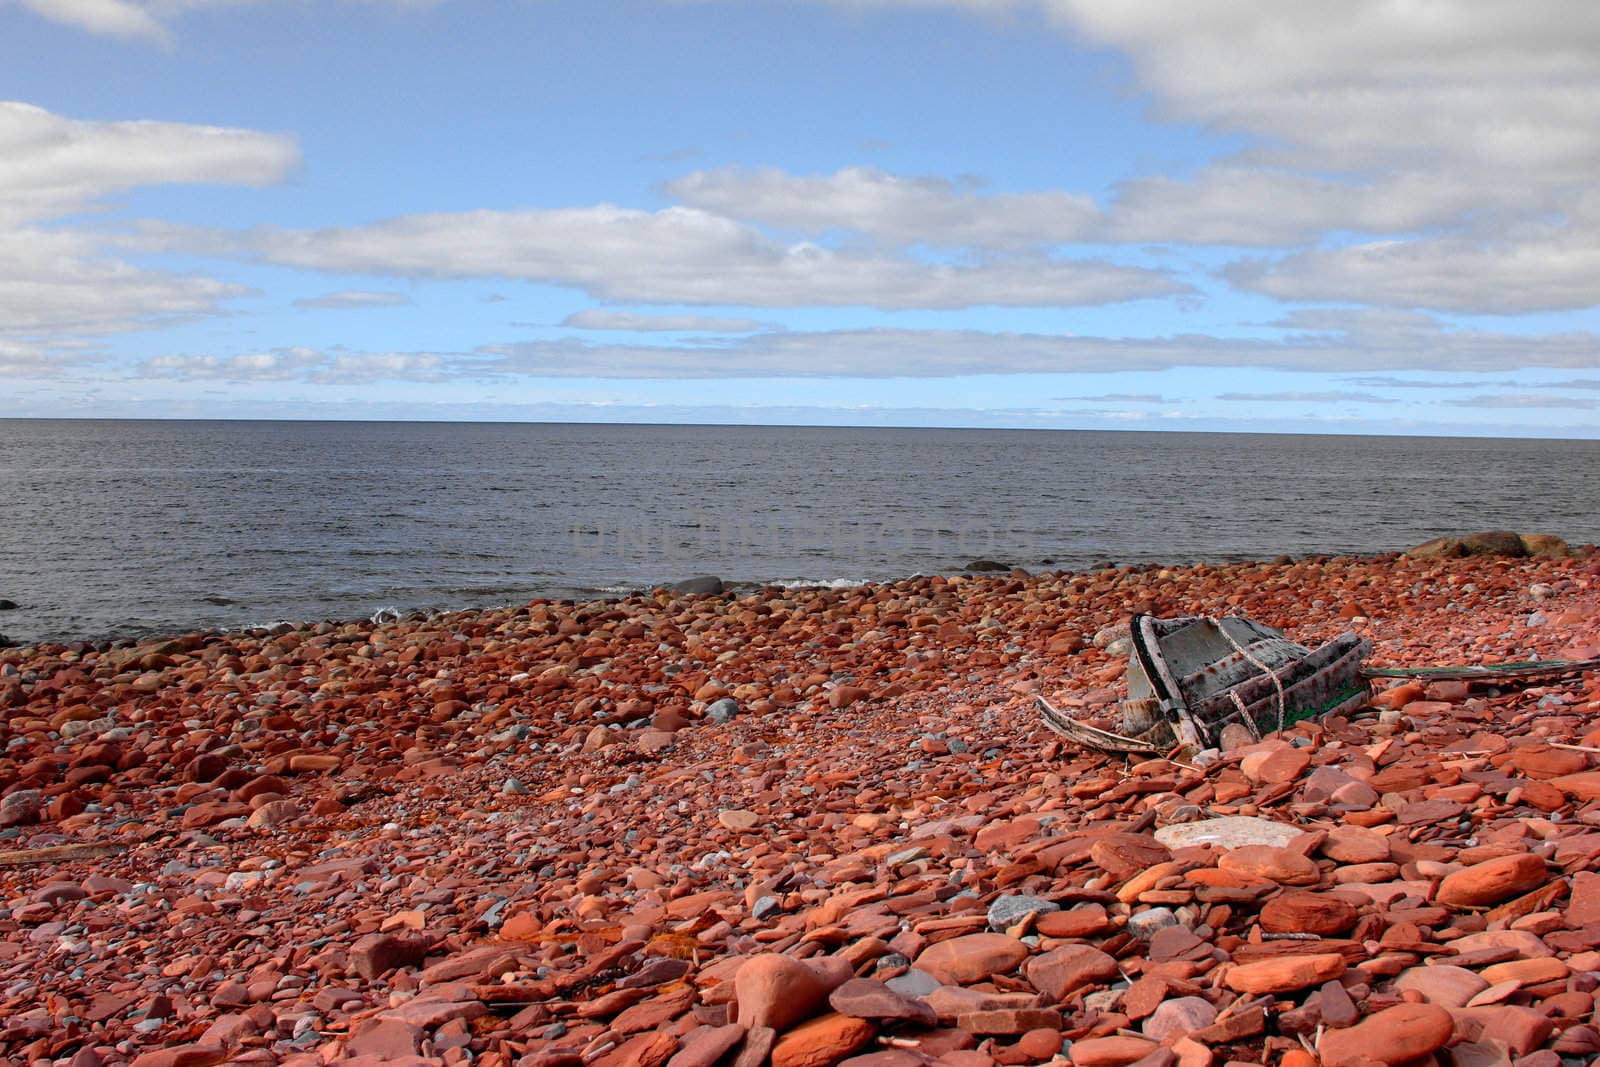 The seacoast covered with red stones